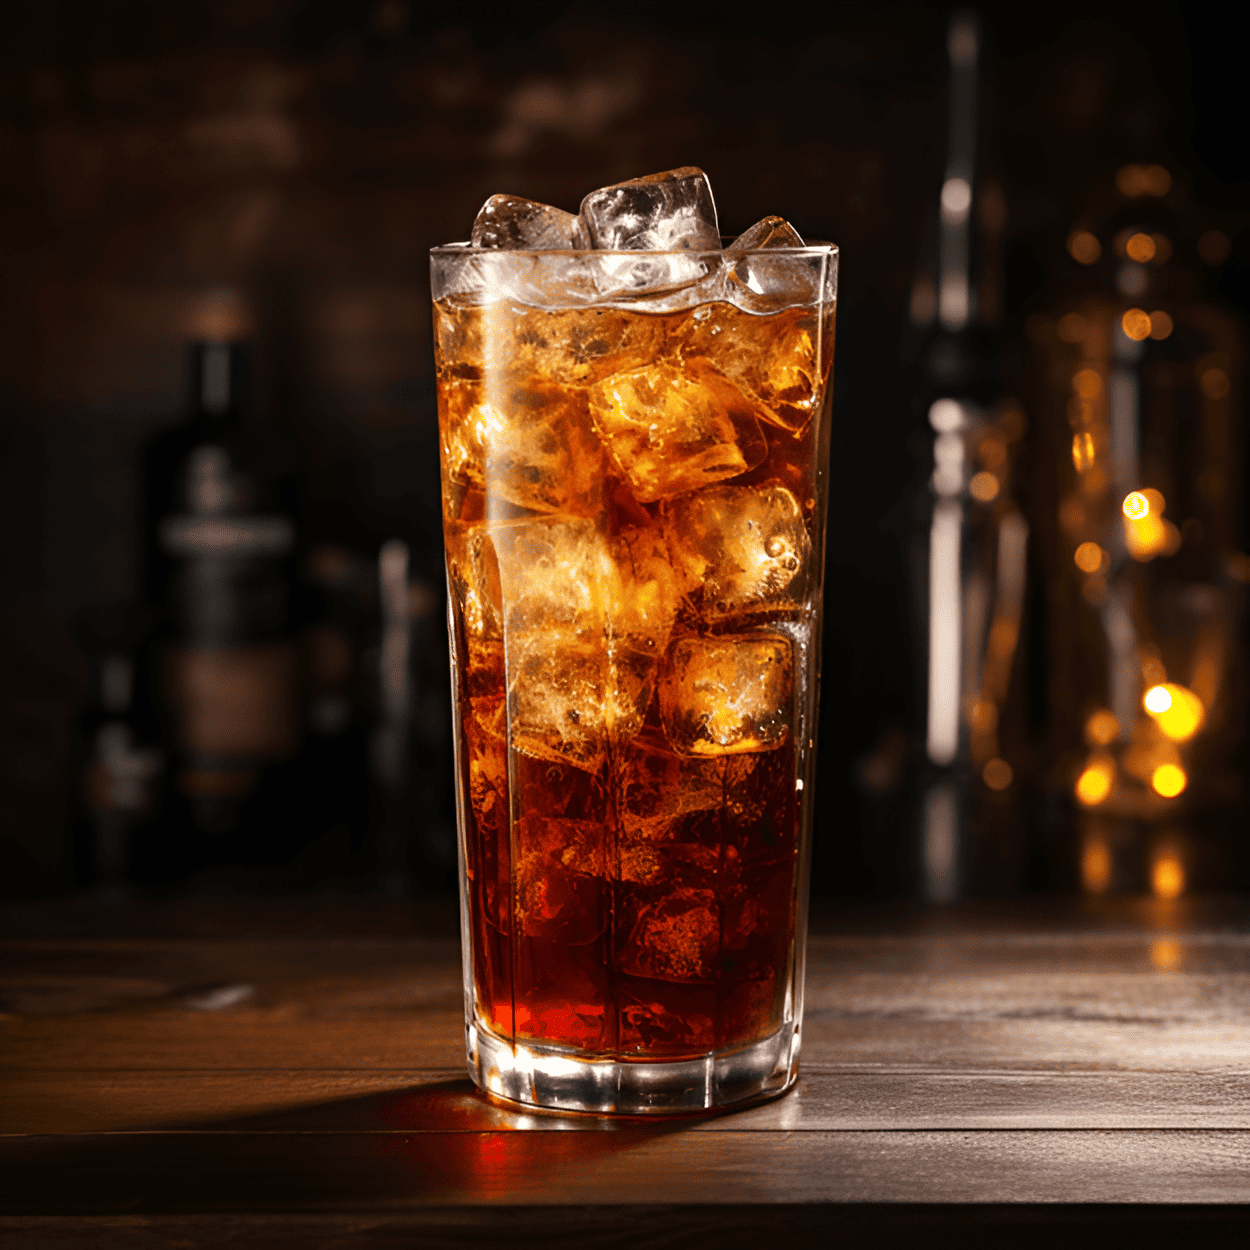 Lemmy Cocktail Recipe - The Lemmy cocktail is a robust and potent drink. The taste is a strong blend of the smoky, sweet, and slightly spicy Jack Daniels whiskey, combined with the fizzy, sweet, and slightly acidic Coca-Cola. It's a well-balanced cocktail that's not too sweet, not too strong, but just right.